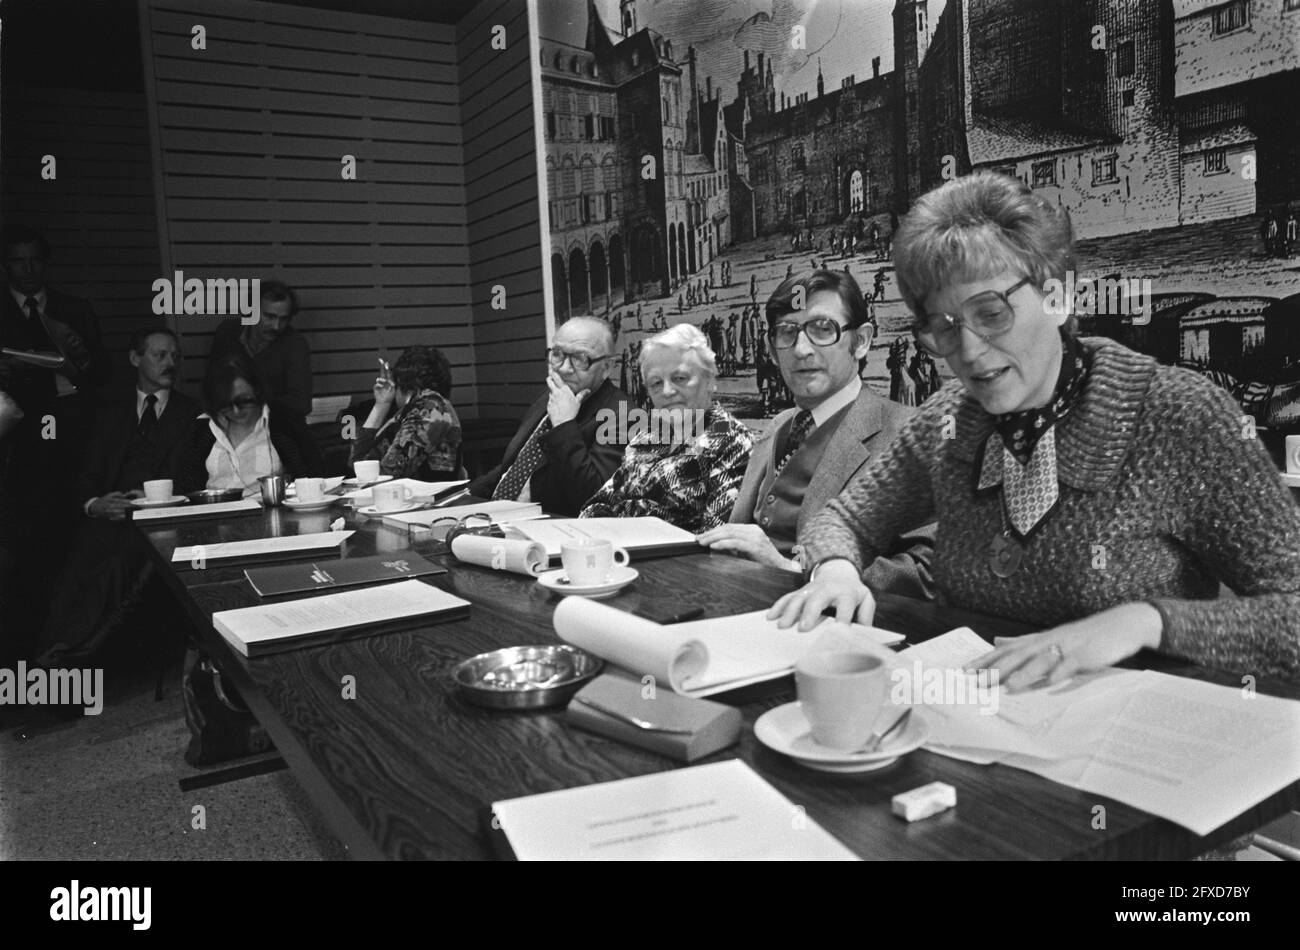 Presentation report Women's emancipation and government prot. vlnr Dam, Dr. Verwey Jonker, Westendorp (CRM), Kraayeveld Wouters, 16 March 1978, The Netherlands, 20th century press agency photo, news to remember, documentary, historic photography 1945-1990, visual stories, human history of the Twentieth Century, capturing moments in time Stock Photo